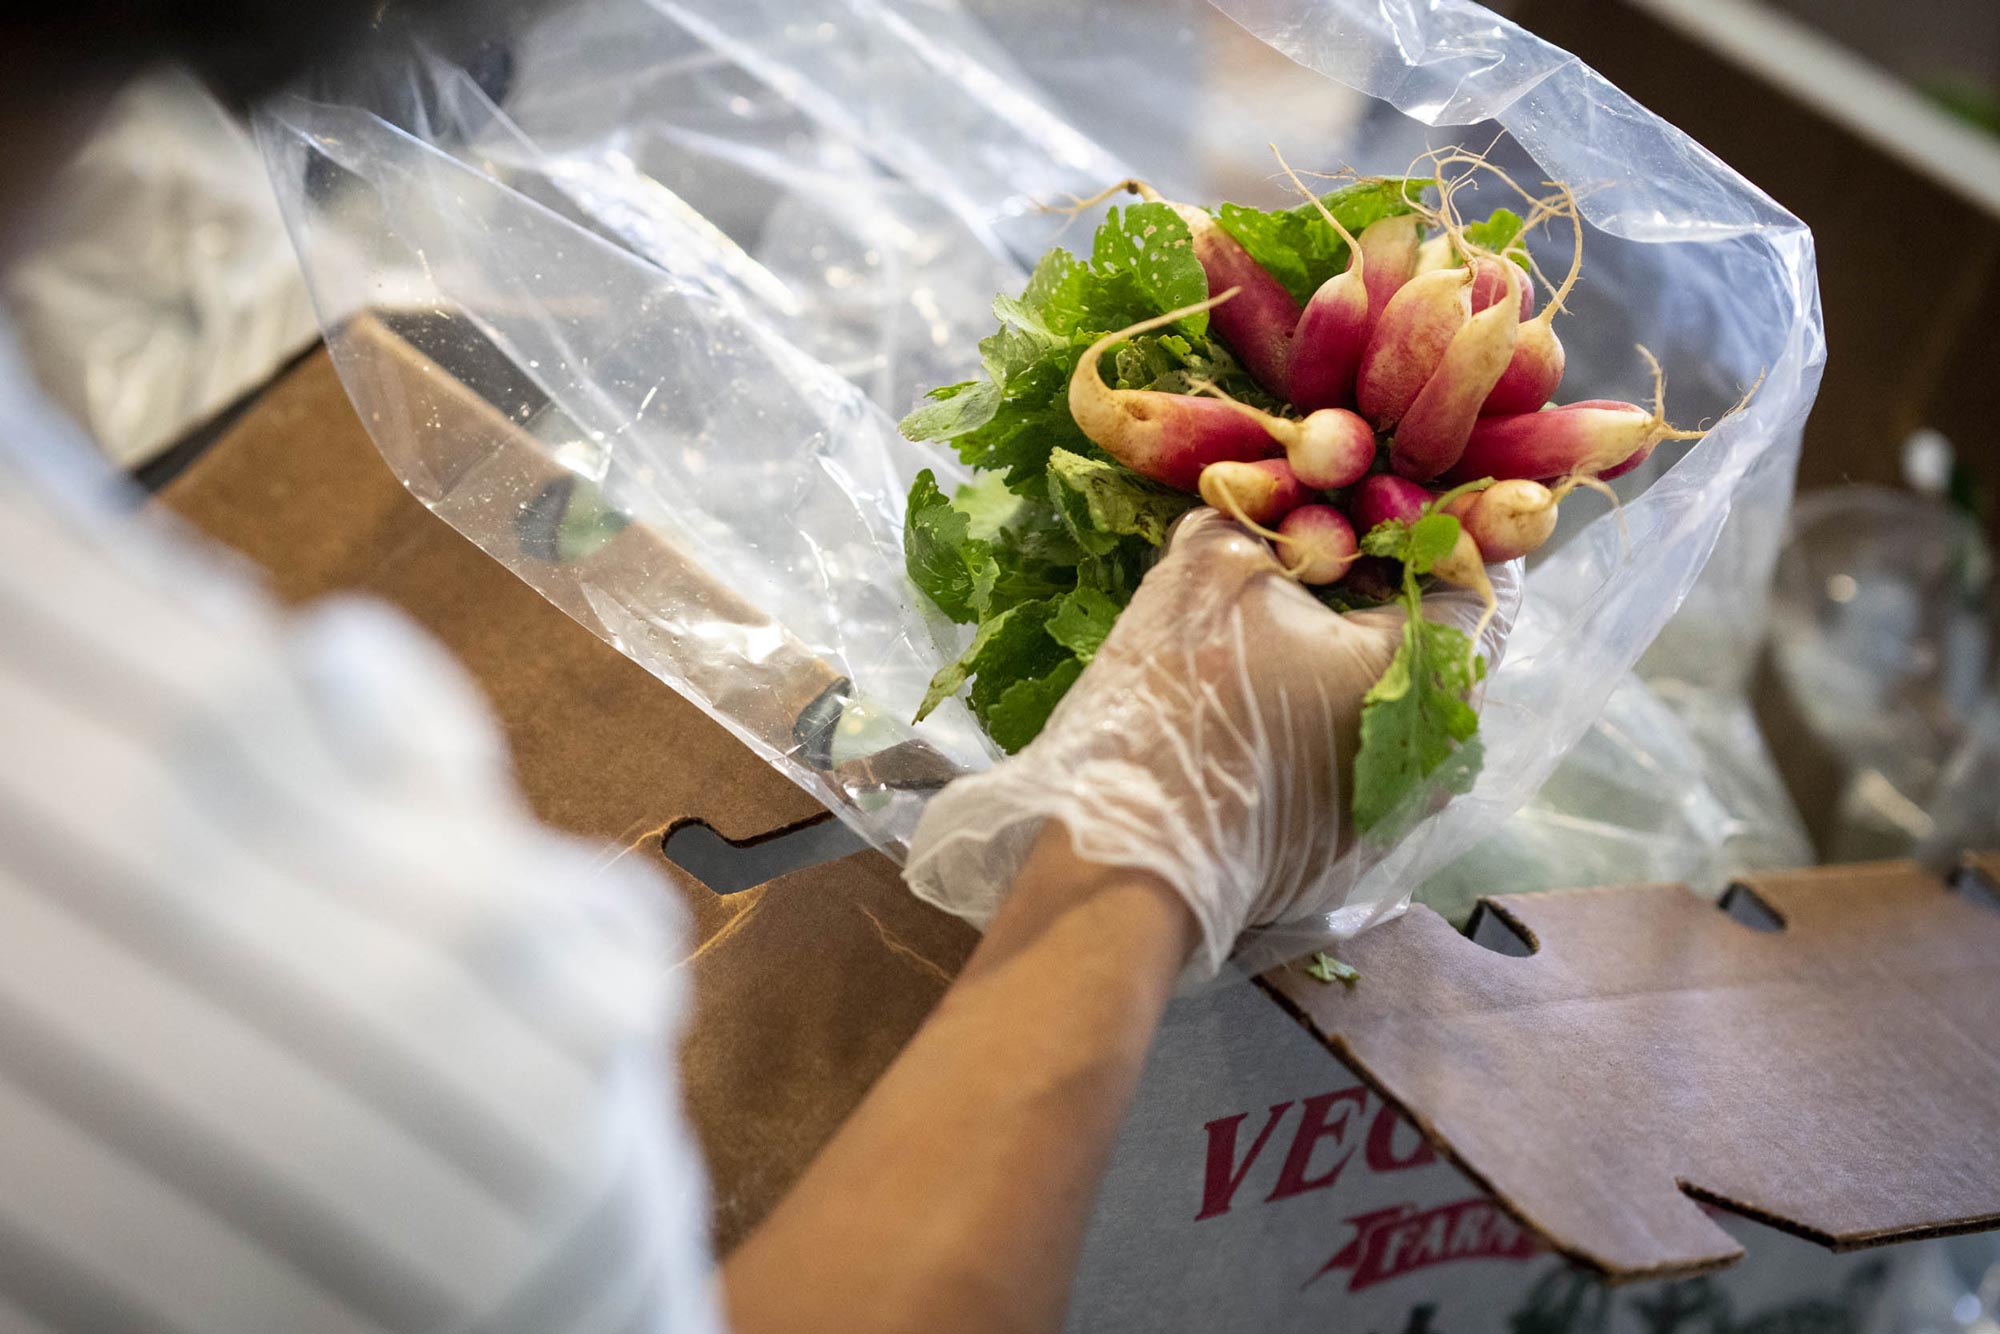 Person pulling radishes out of a box